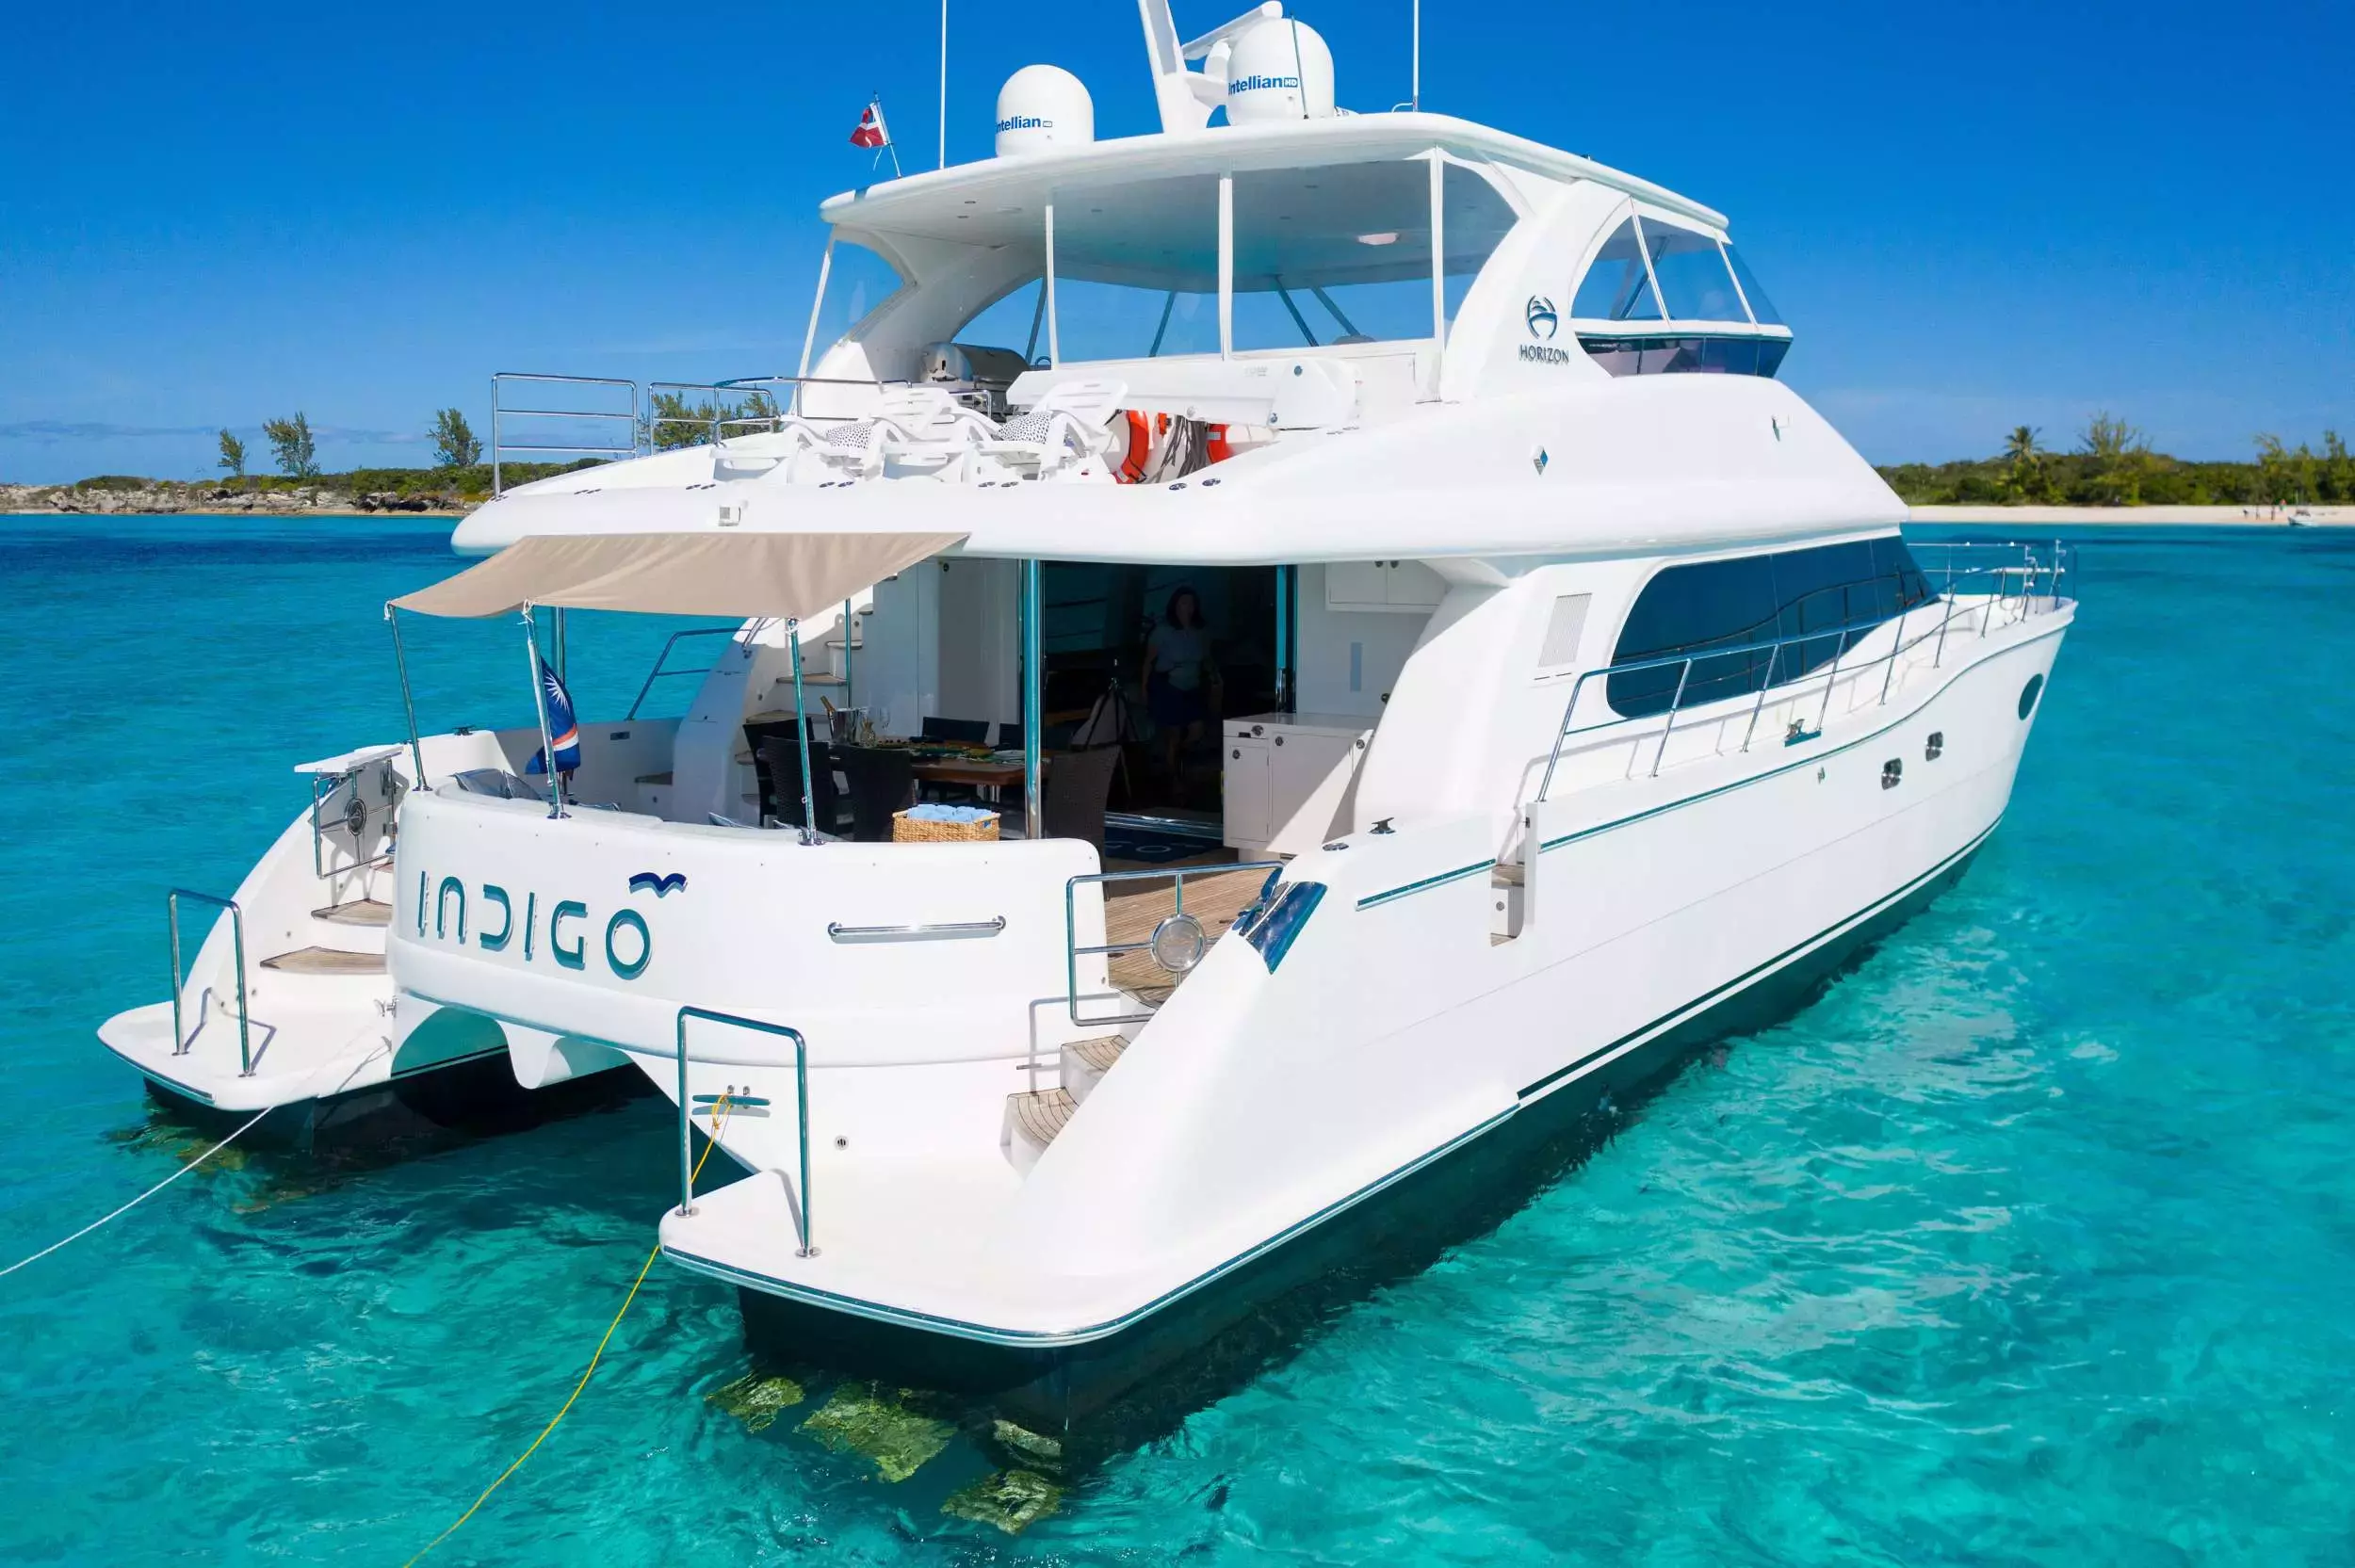 Indigo III by Horizon - Top rates for a Charter of a private Power Catamaran in Bahamas